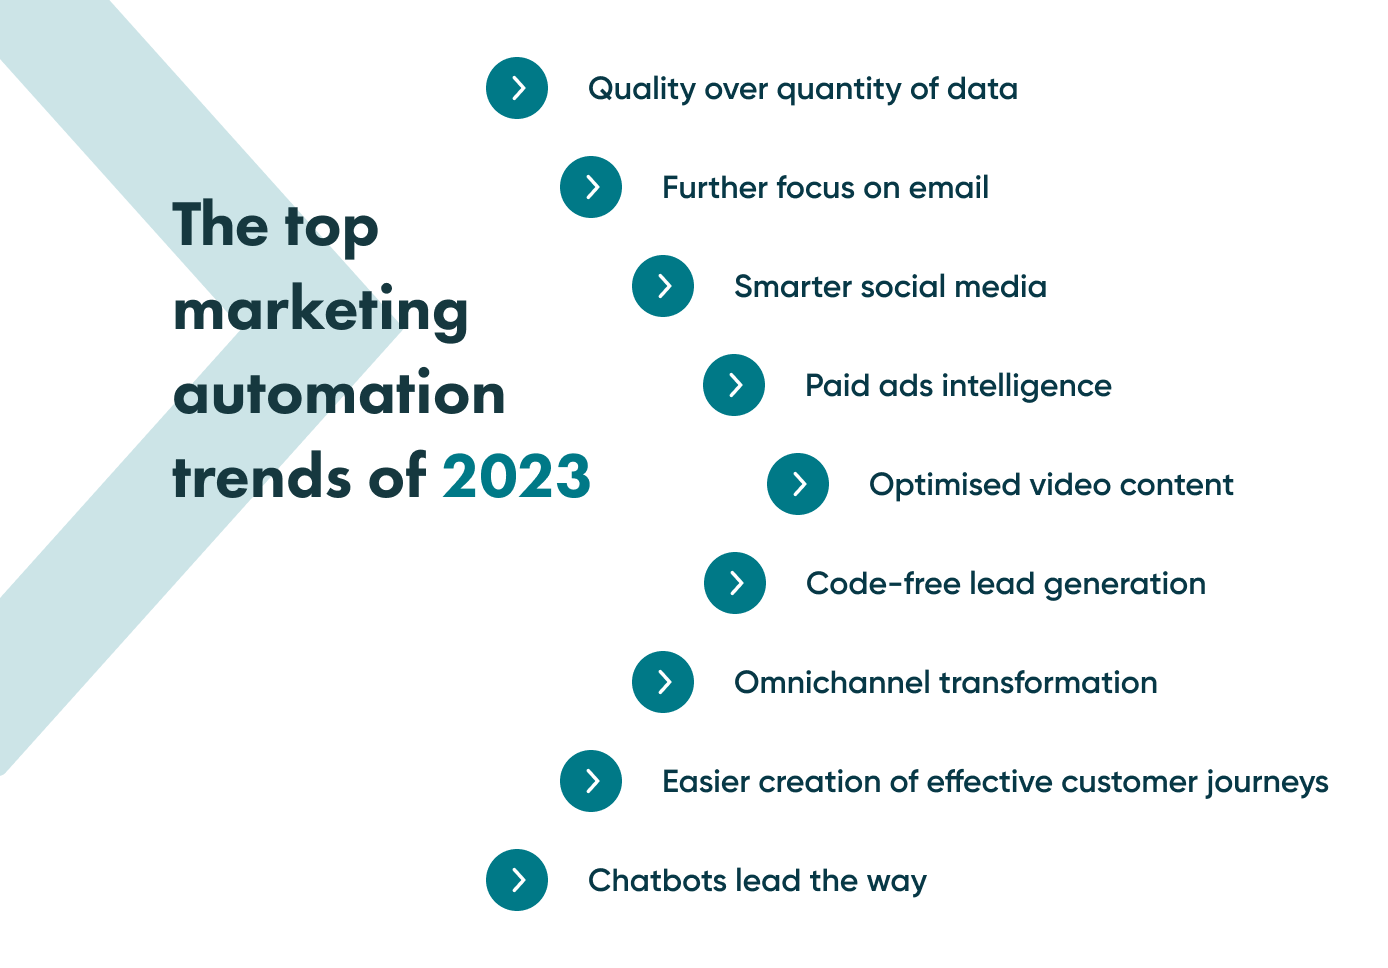 Here are 9 trends that we will see in marketing automation in the coming year: quality over quantity of data, further focus on email, smarter social media, paid ads intelligence, optimised video content, code-free lead generation, omnichannel transformation, easier creation of effective customer journeys, and chatbots lead the way.